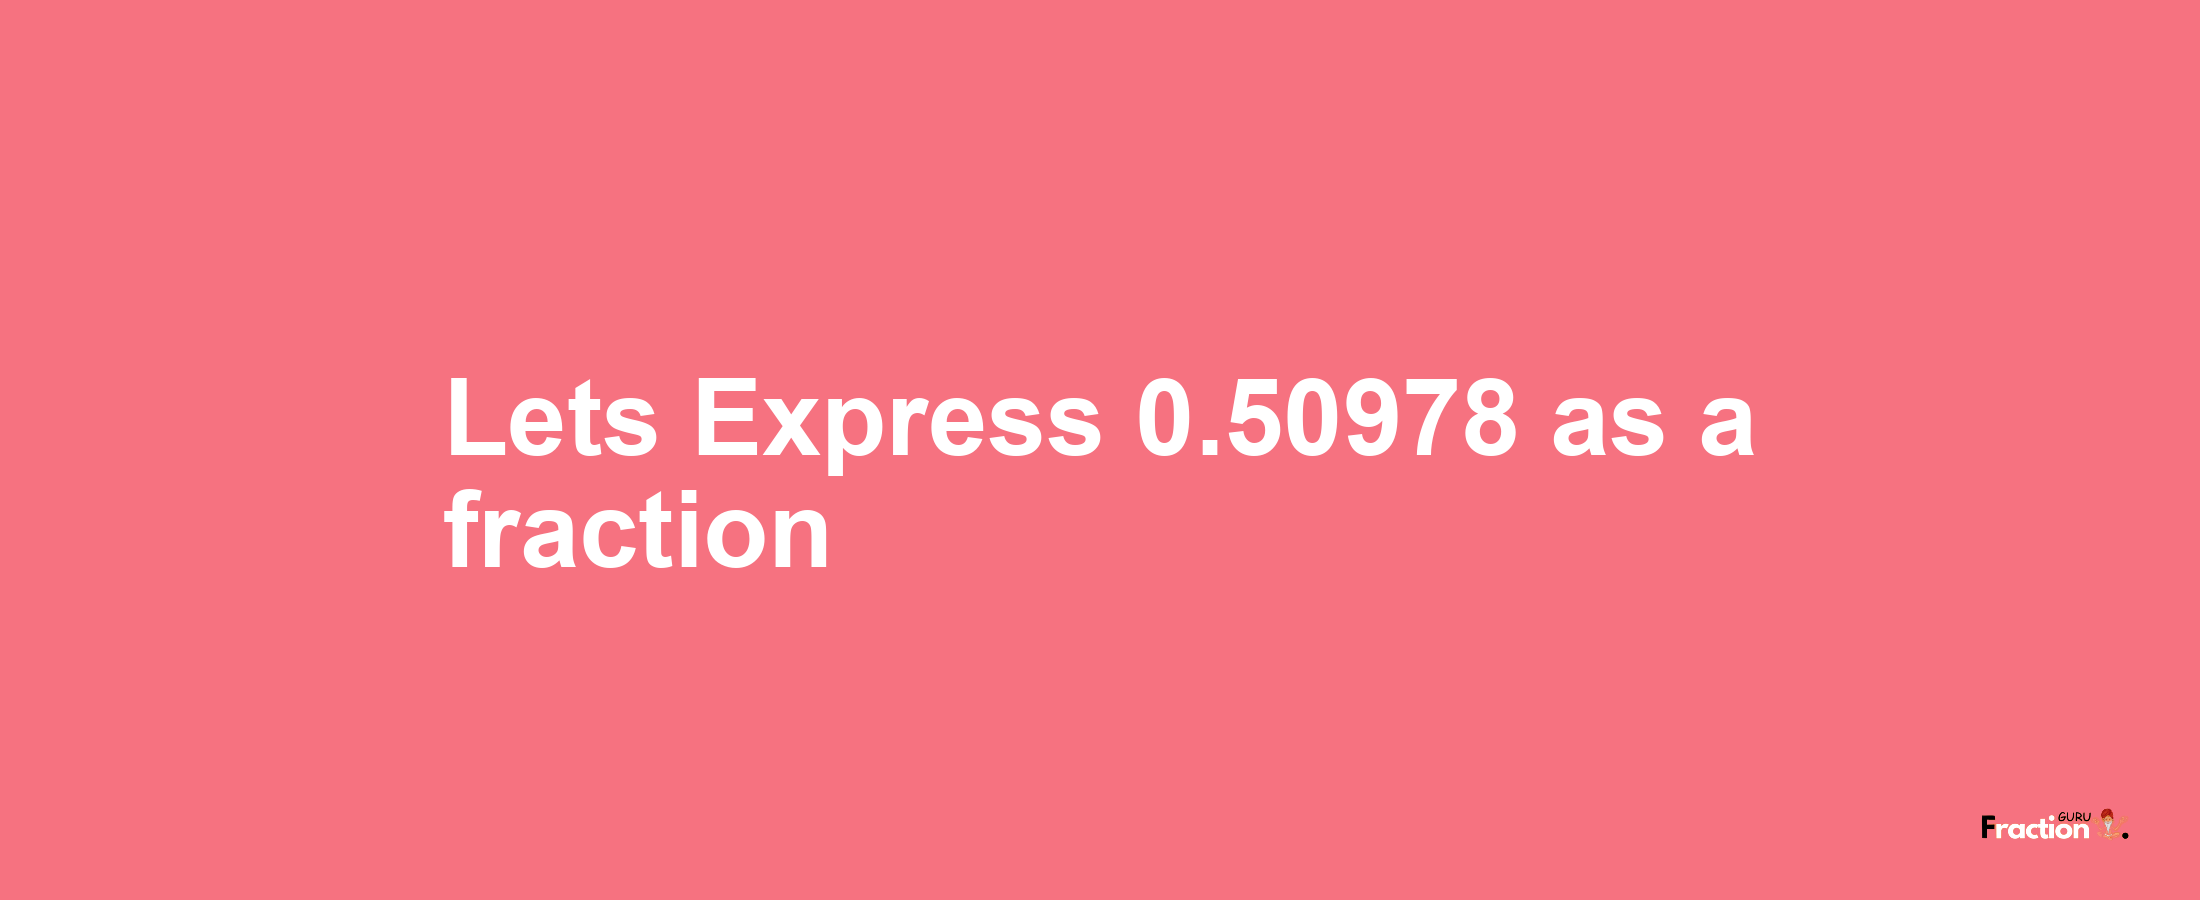 Lets Express 0.50978 as afraction